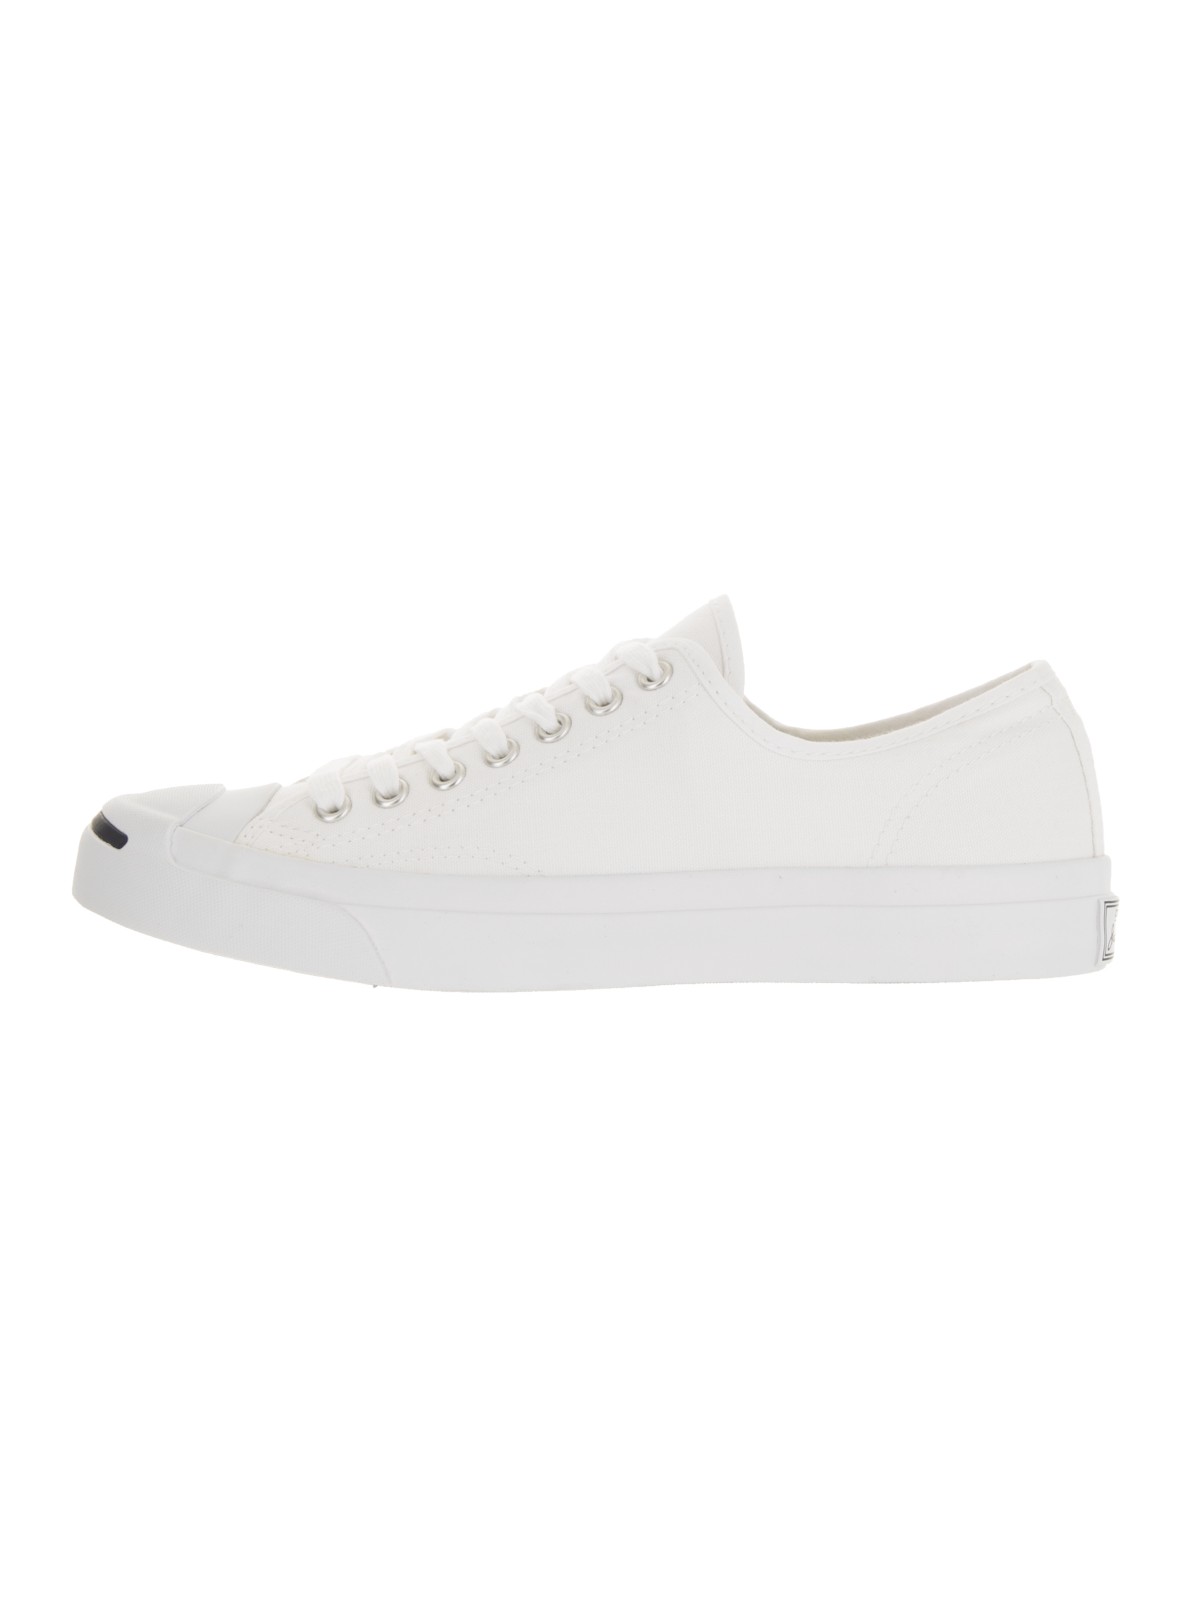 Converse Unisex Jack Purcell Cp Ox Casual Shoe - image 3 of 5